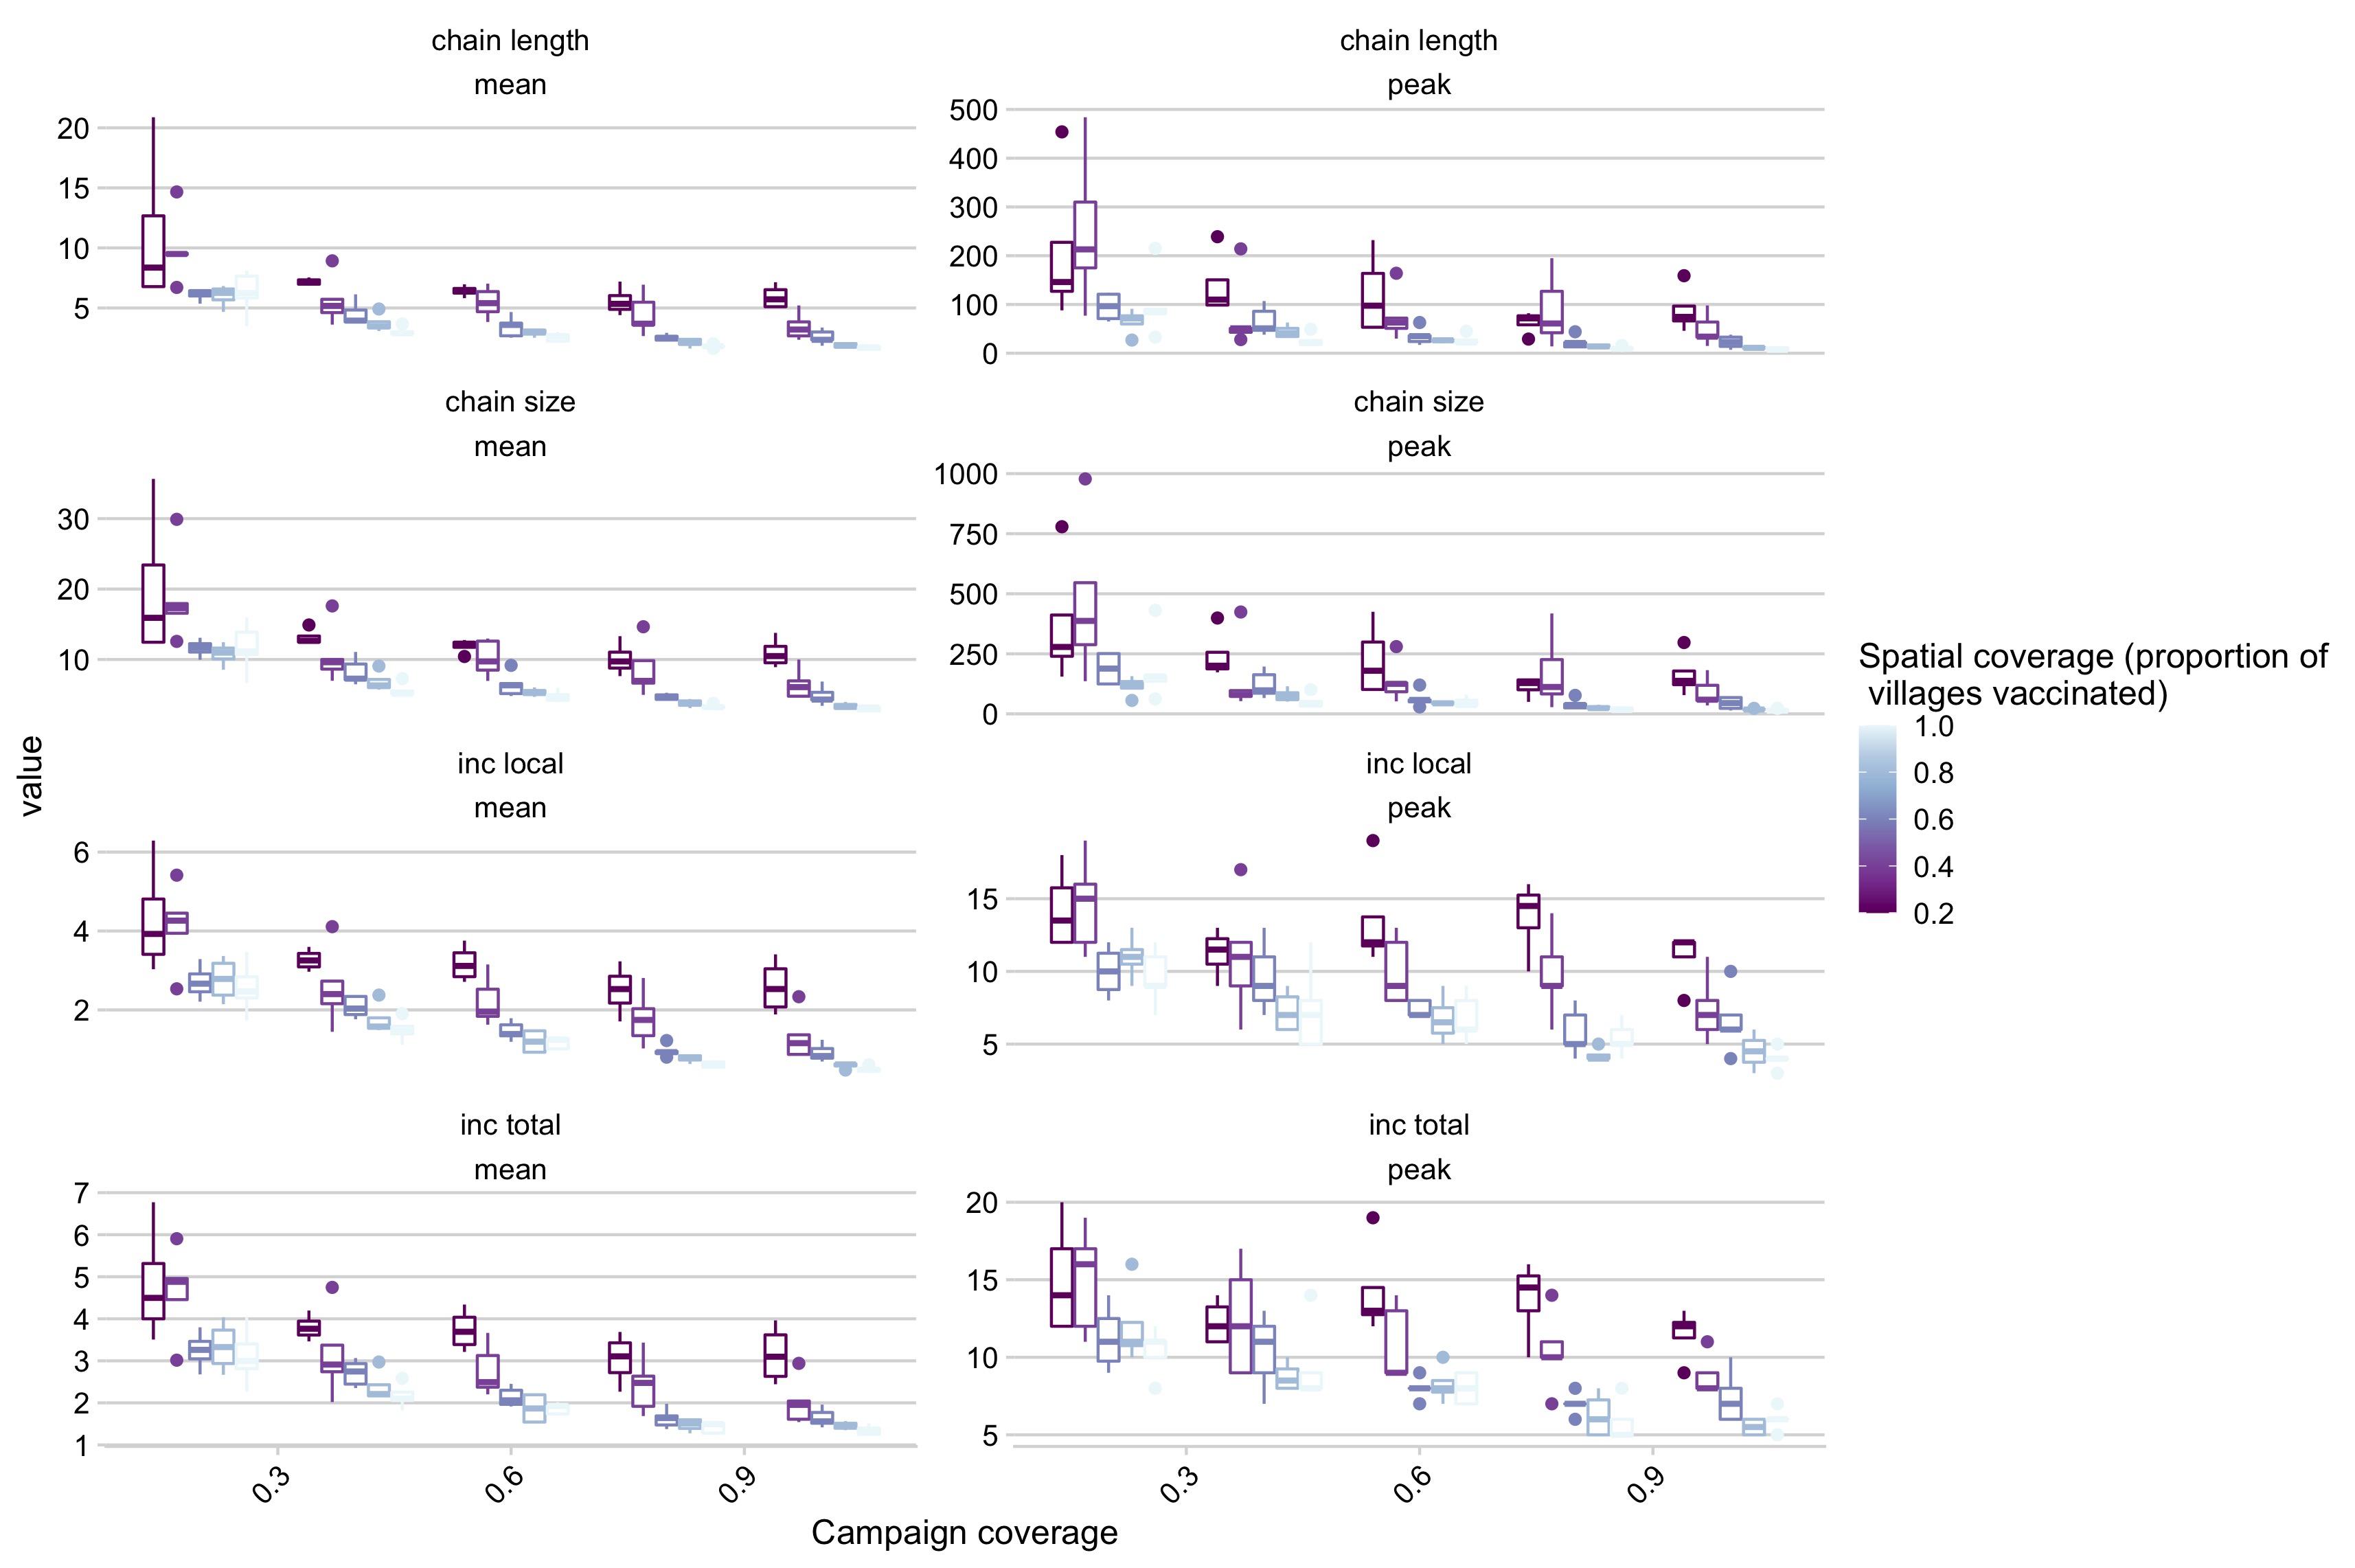 Simulation outcomes across a range of campaign coverage and spatial coverage incorporating reductions in the maximum number of secondary cases rate as district coverage increases where panels are different summary statistics of the simulations (i.e. chain length mean, chain length peak, etc.).